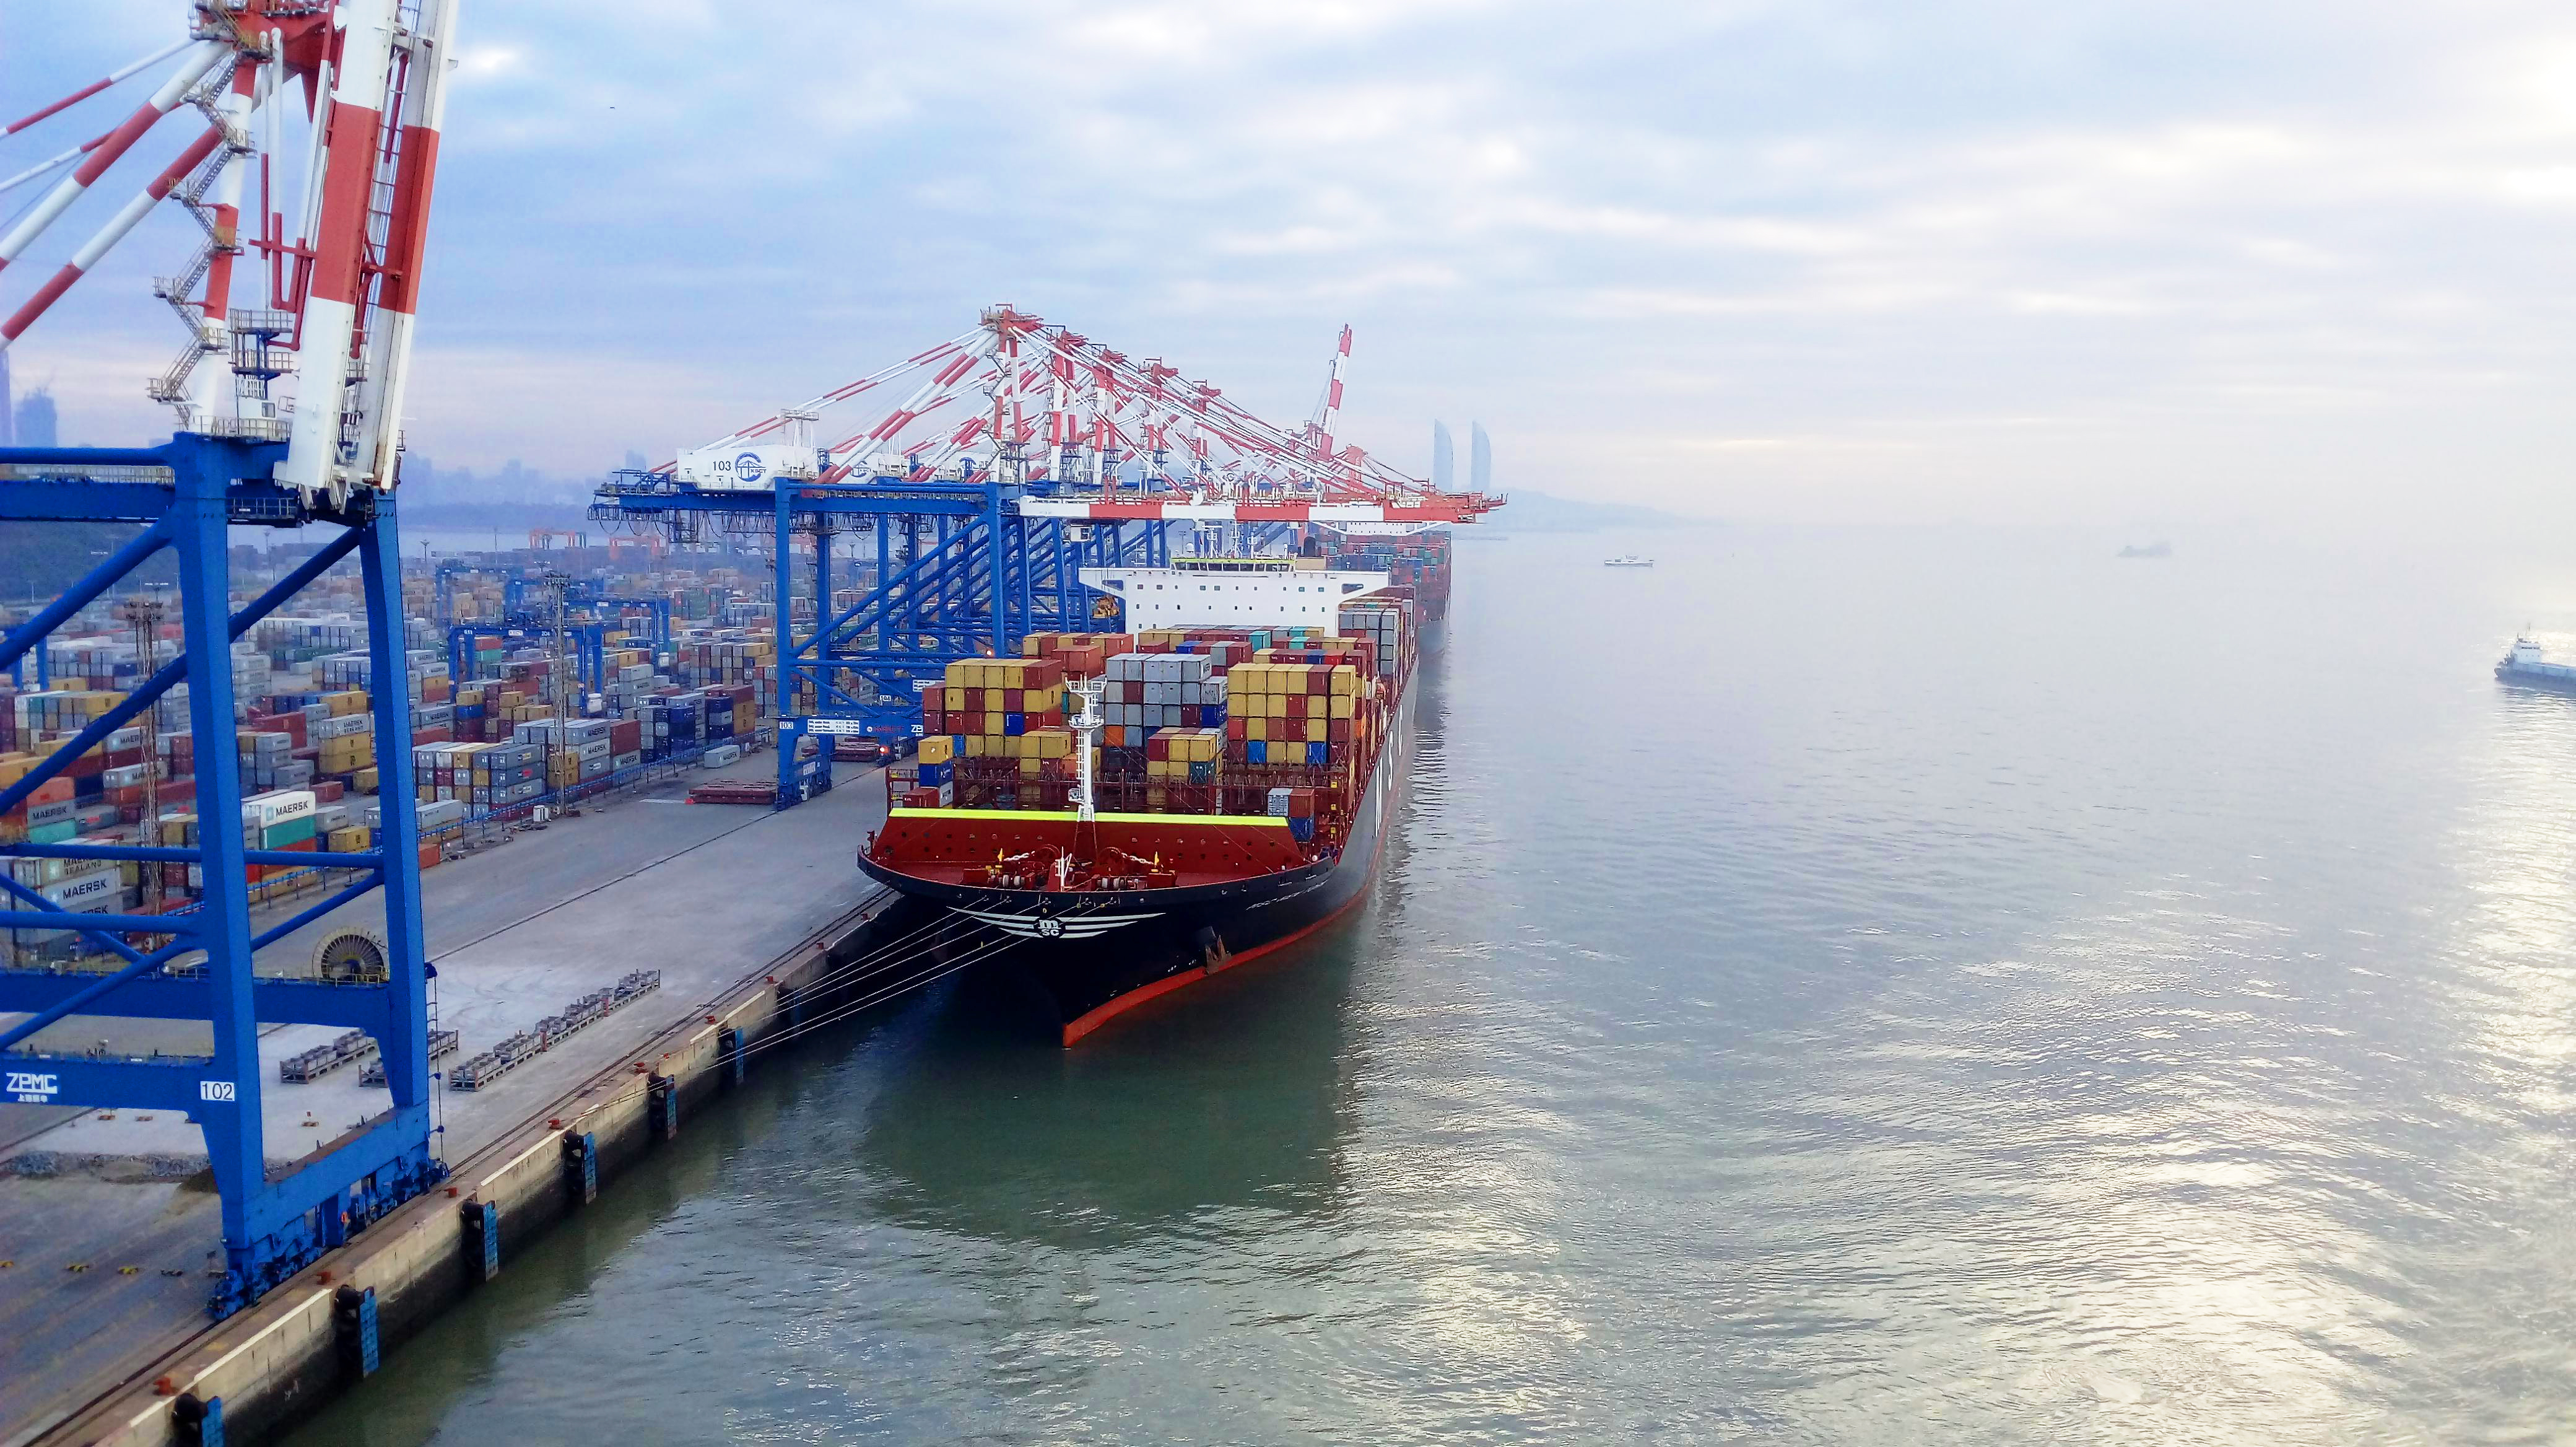 New anemometer "Xiaohei" appears at Xiamen International Container Terminal